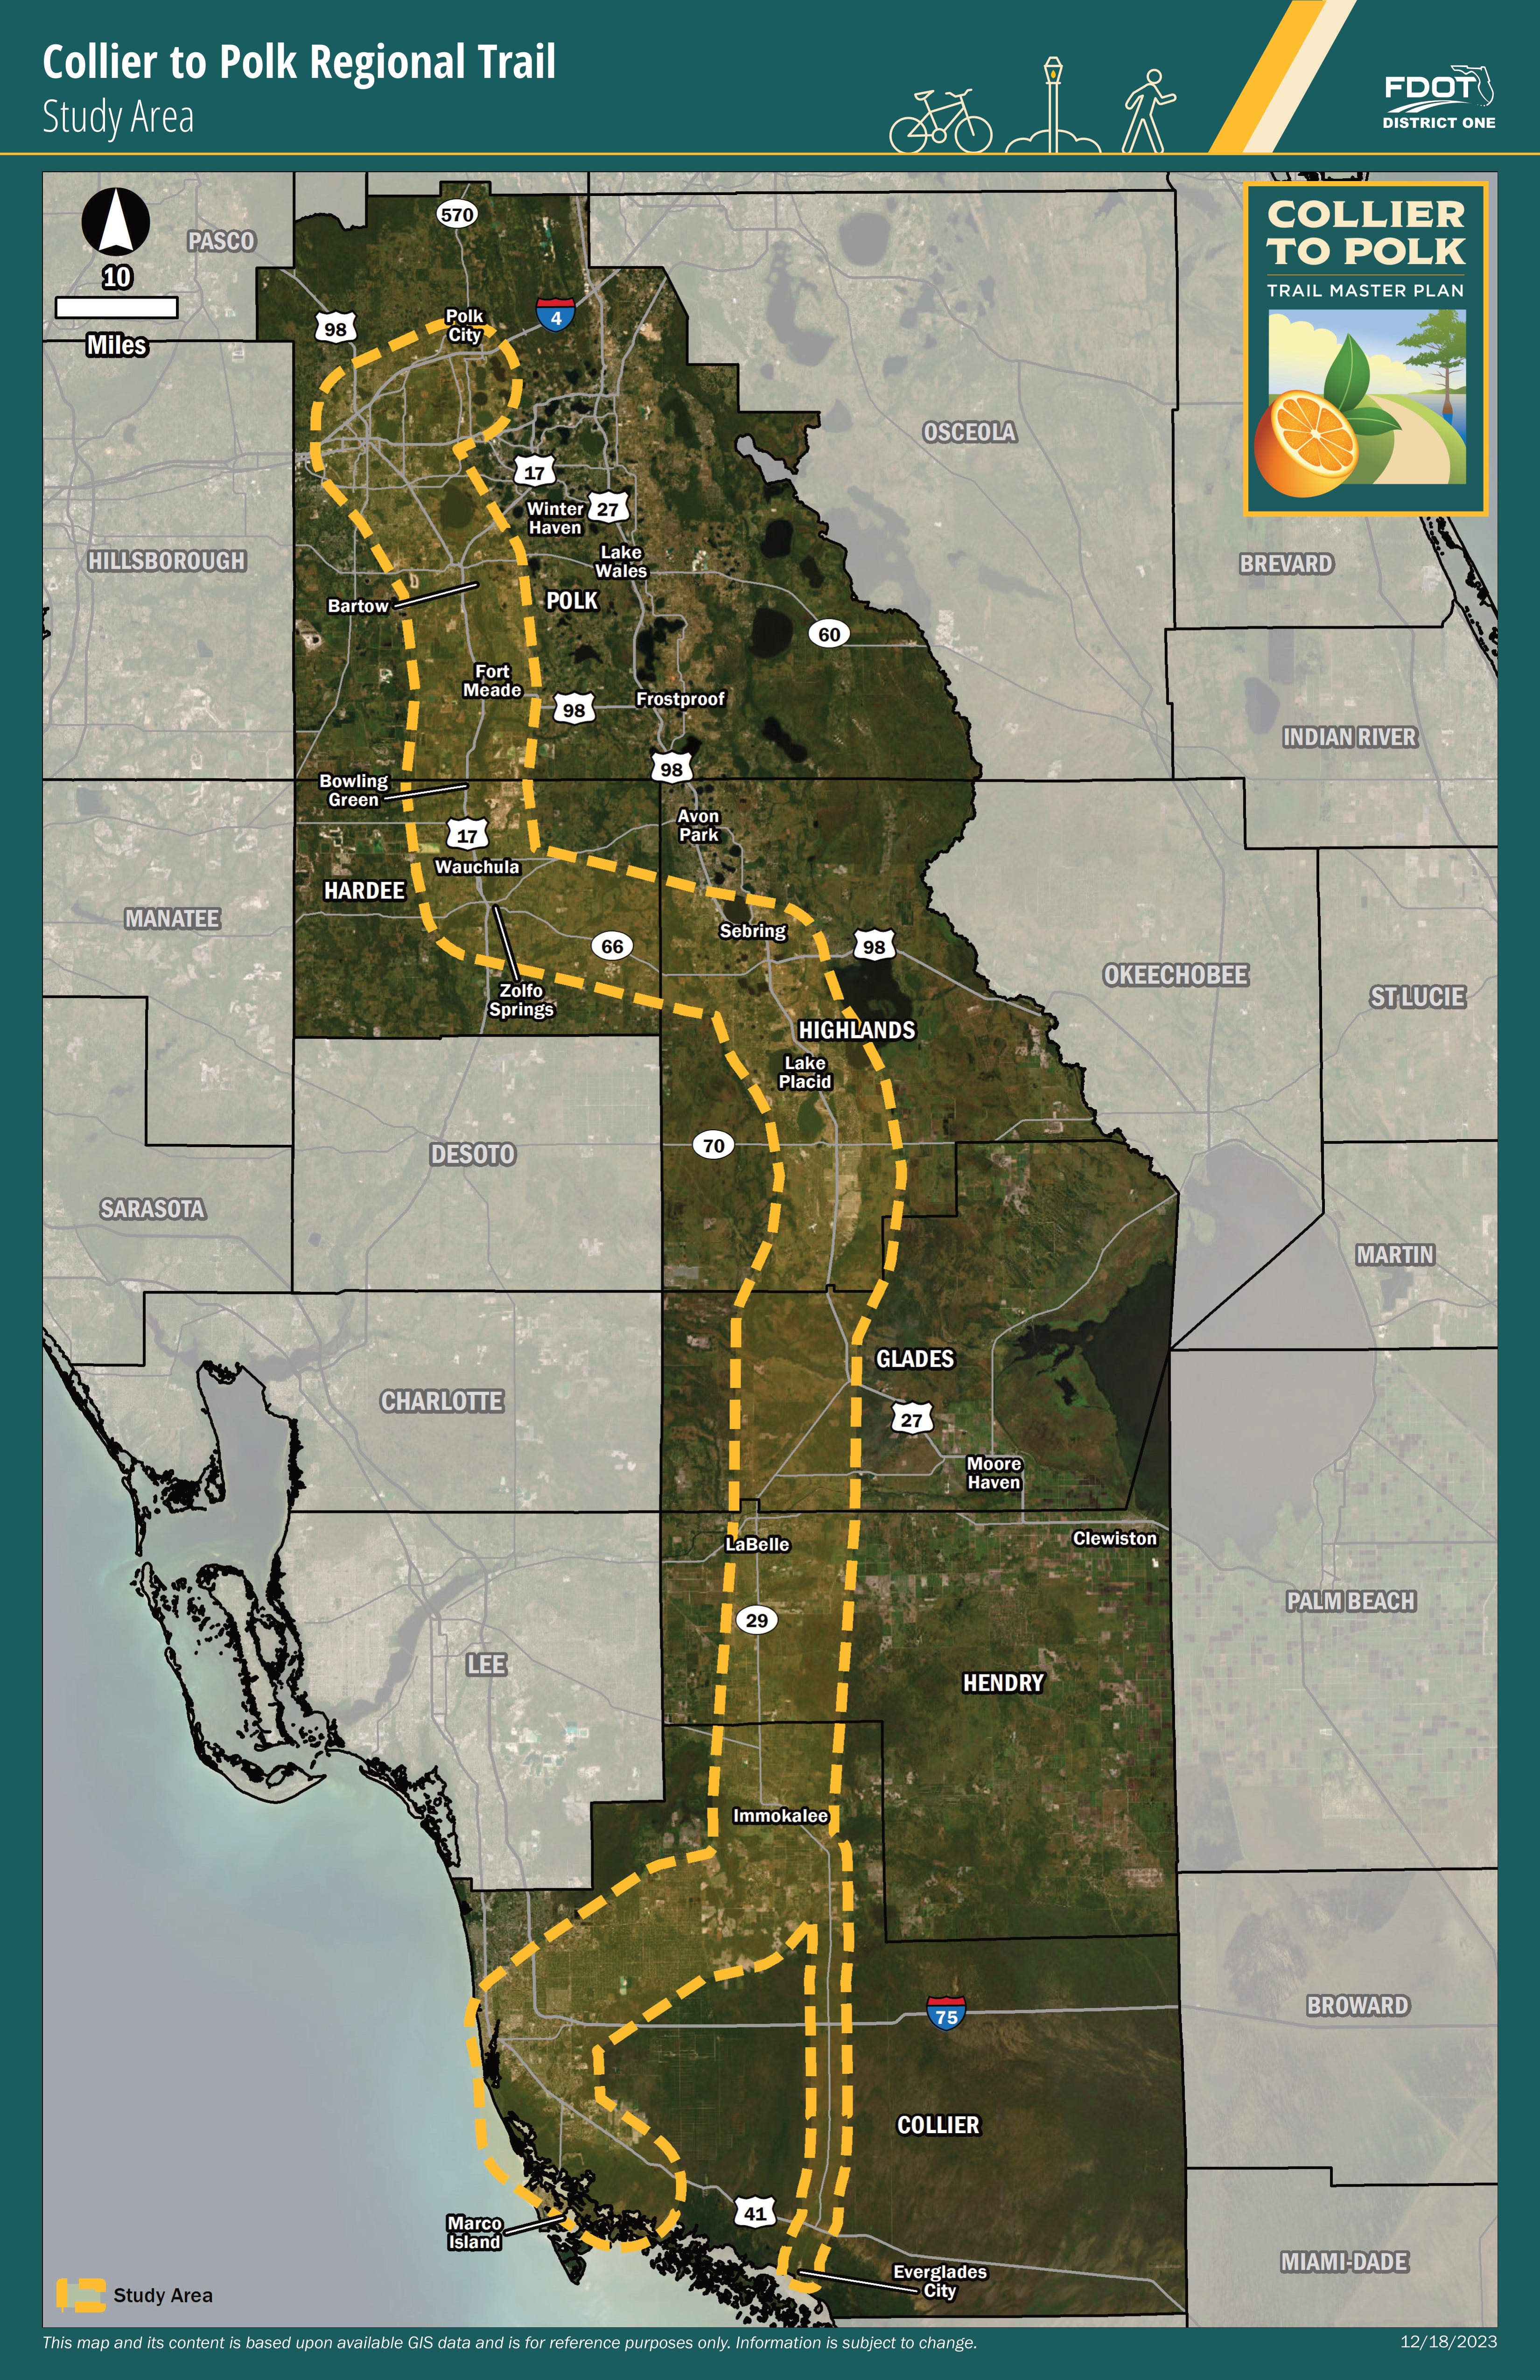 FDOT is planning a 210-mile walking and biking trail from Polk to Collier County